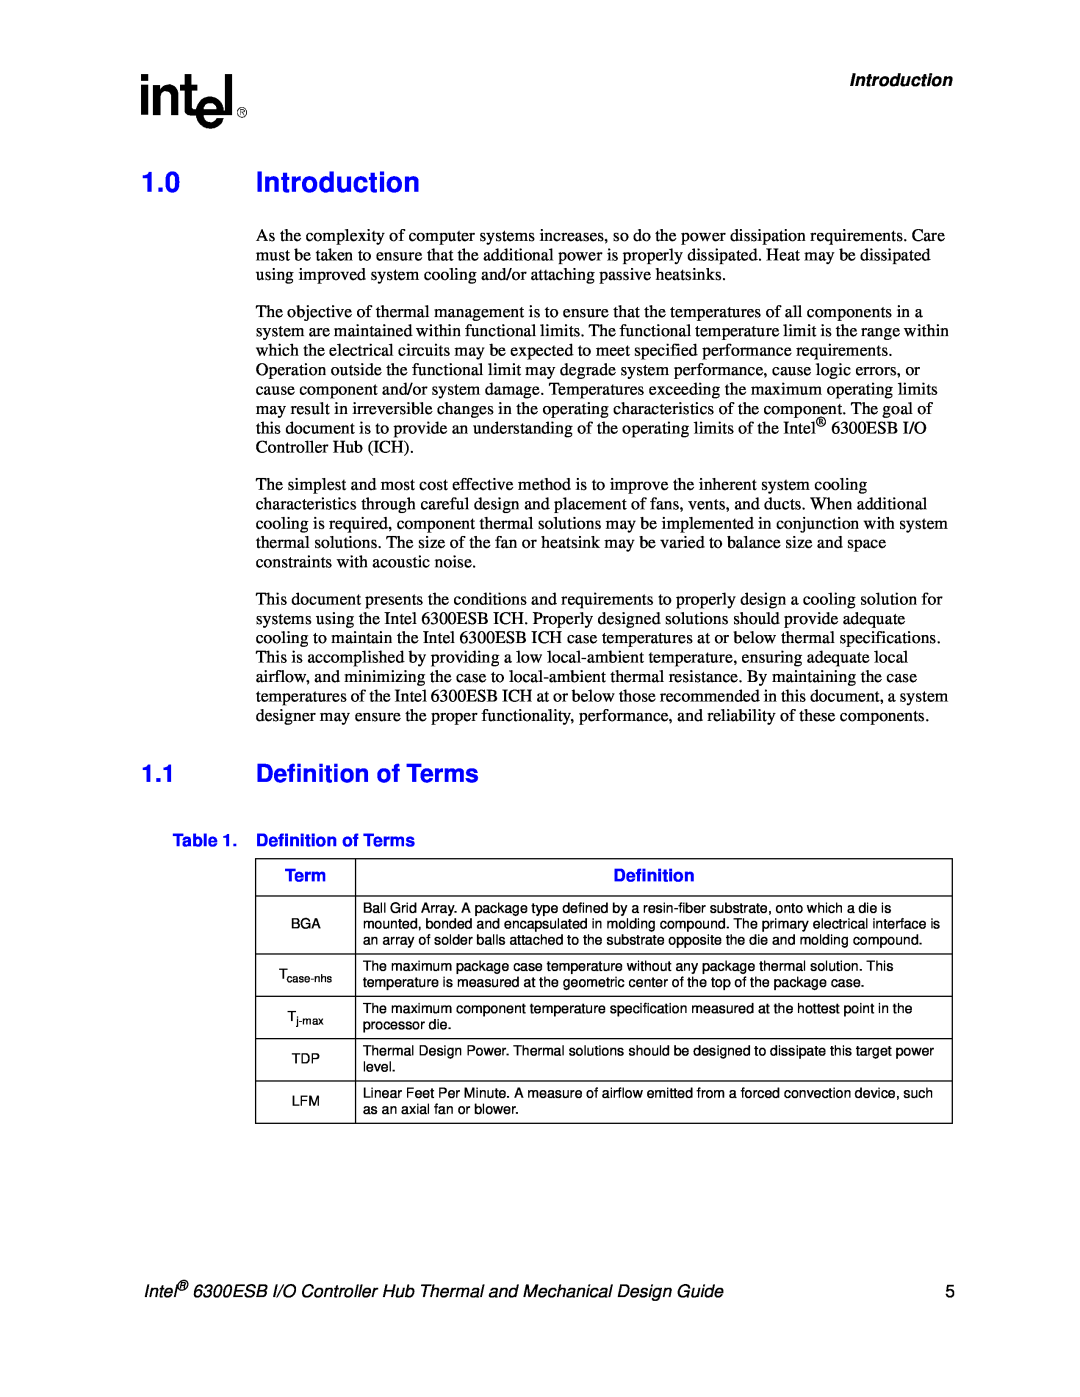 Intel 6300ESB manual 1.0Introduction, 1.1Definition of Terms 